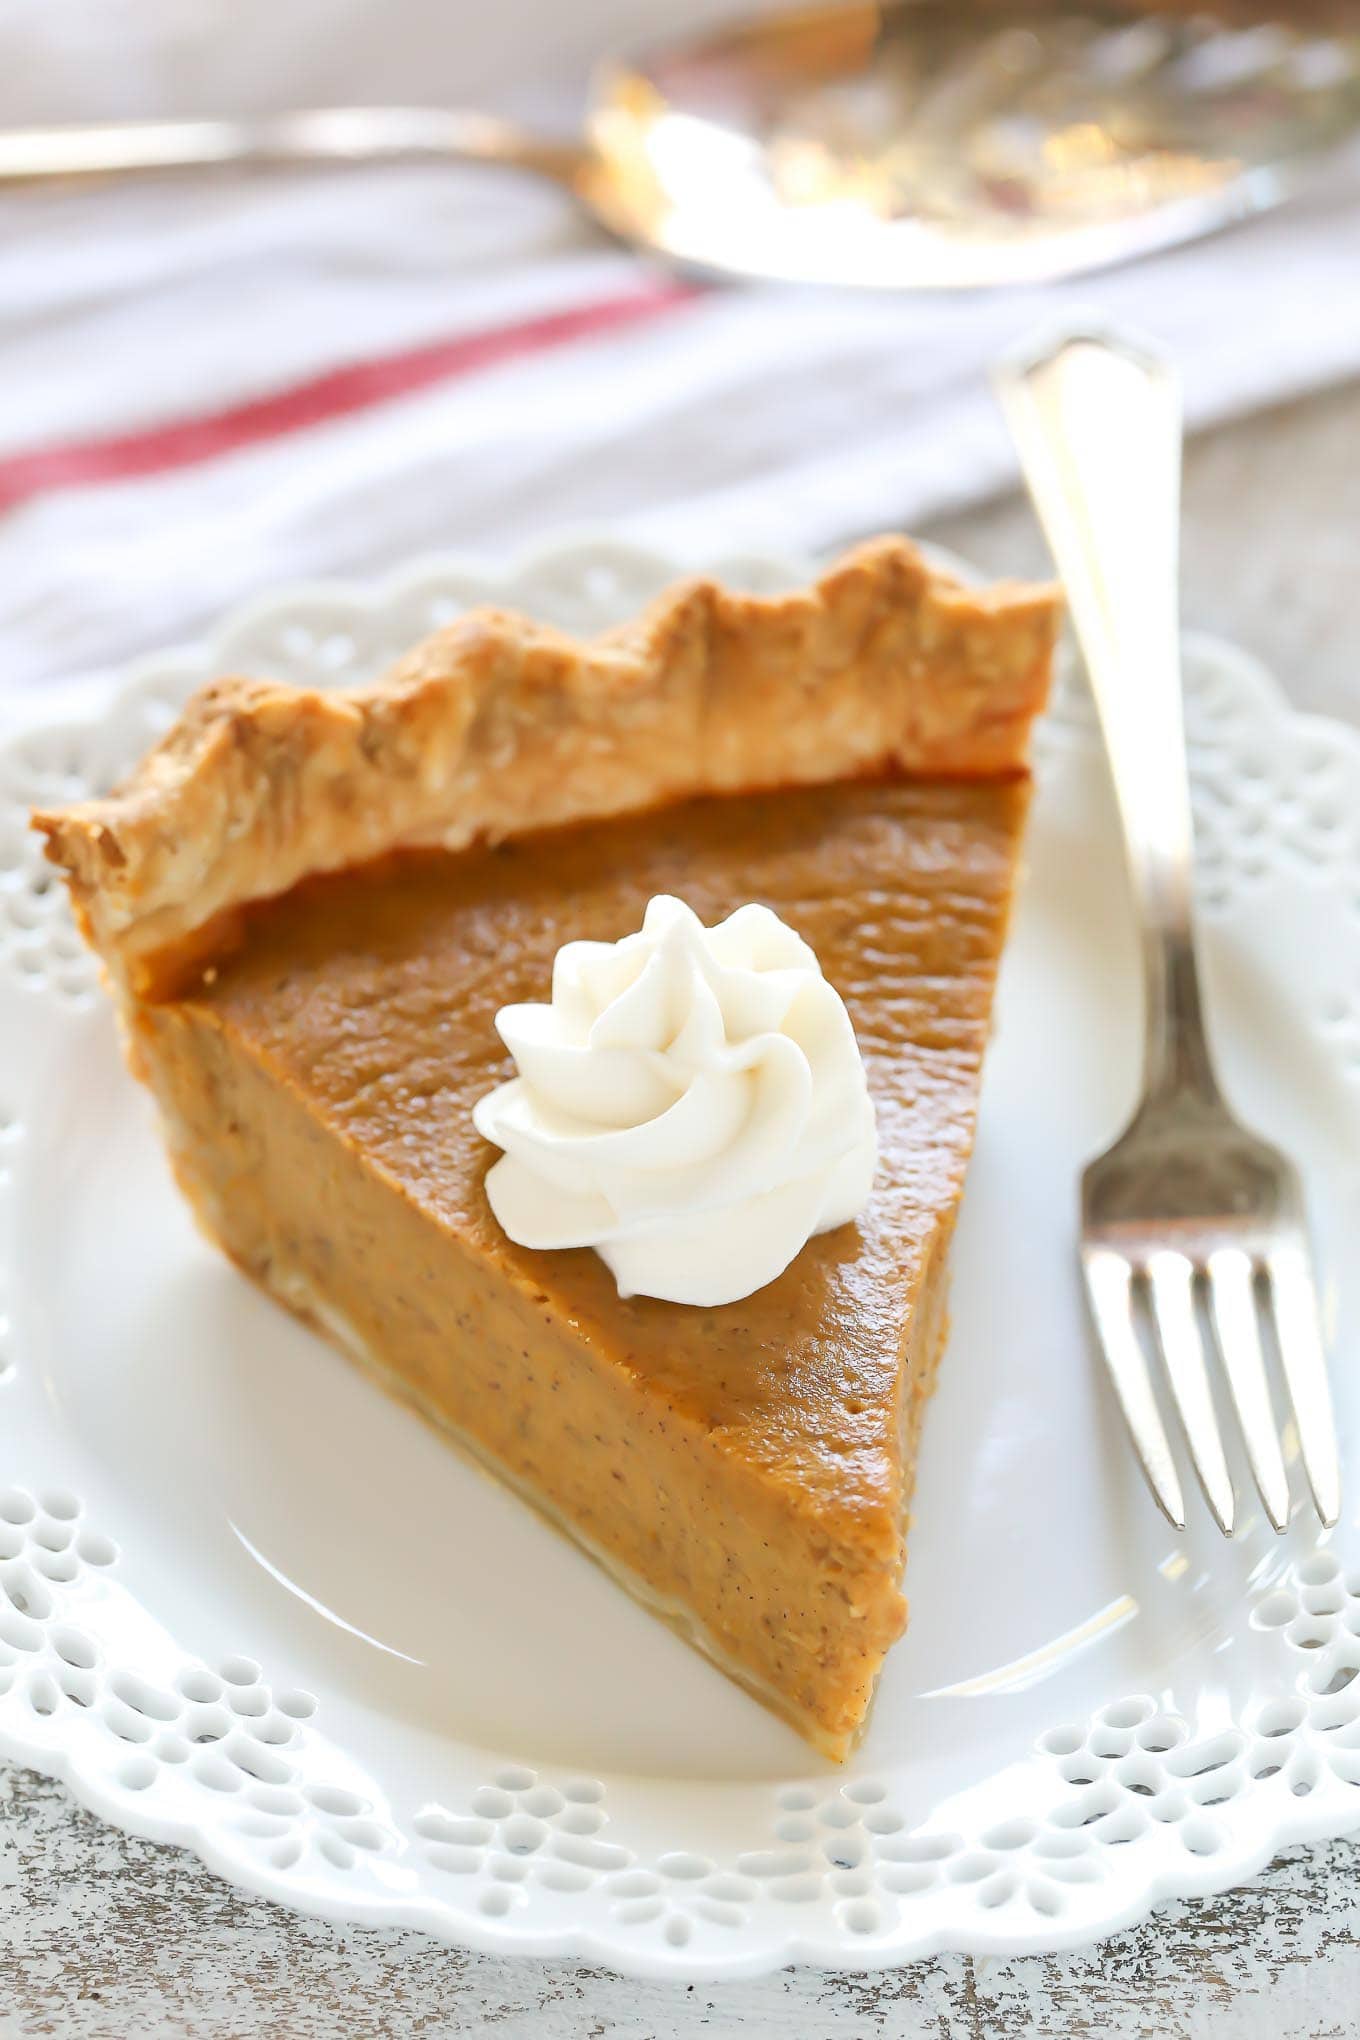 Pumpkin pie on a white plate, a dollop of whip cream on top and a fork beside it.